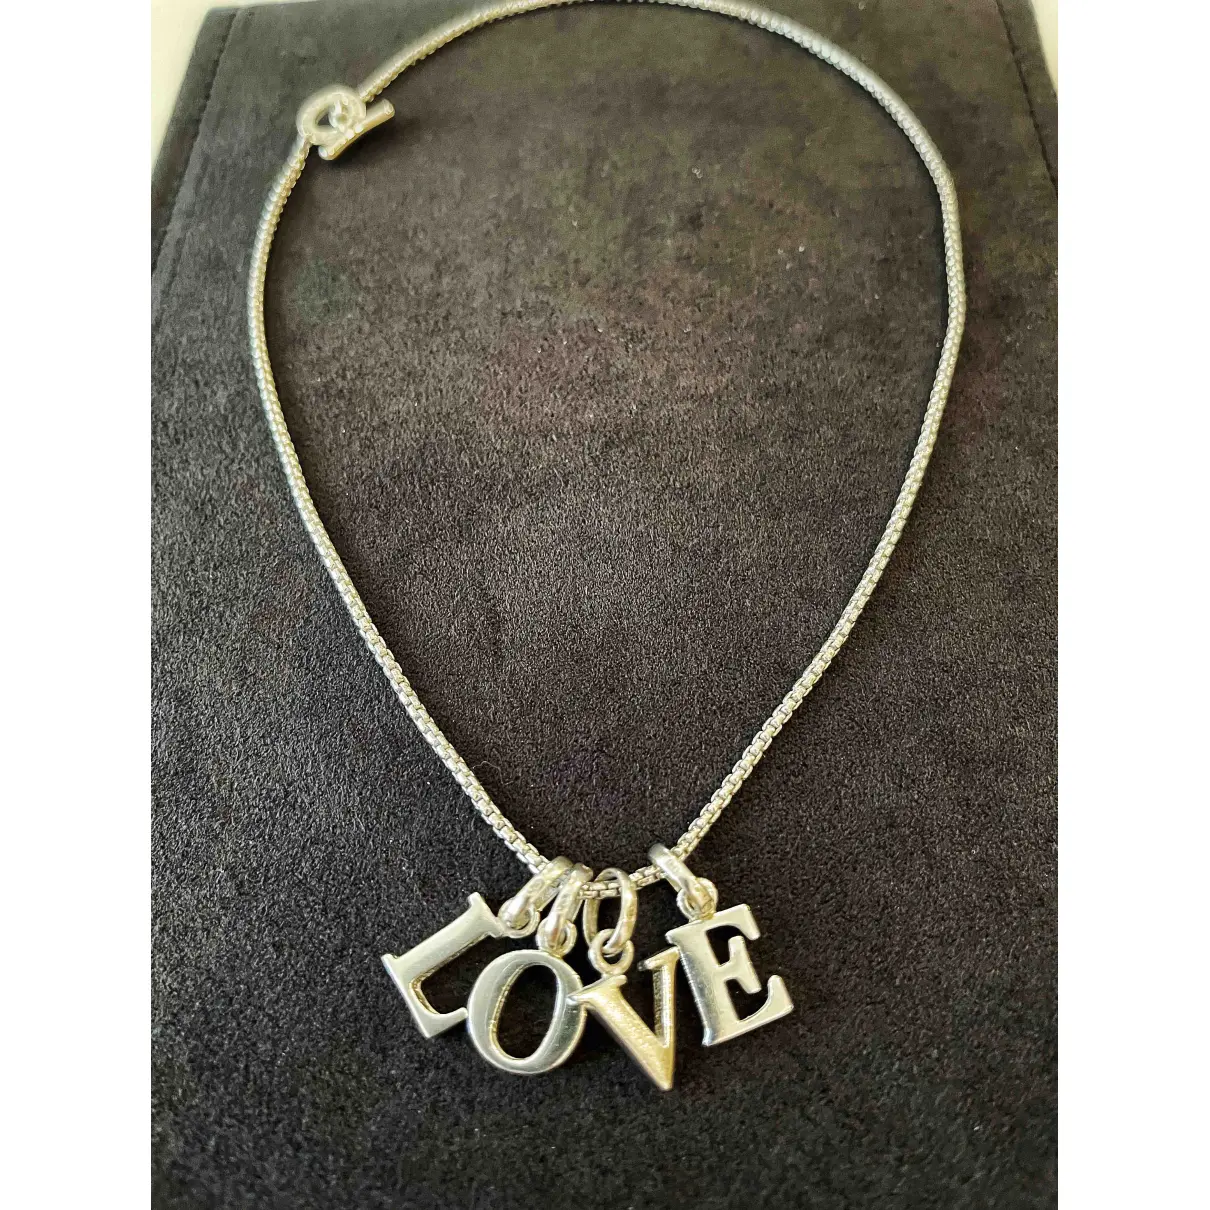 Buy Links Of London Silver necklace online